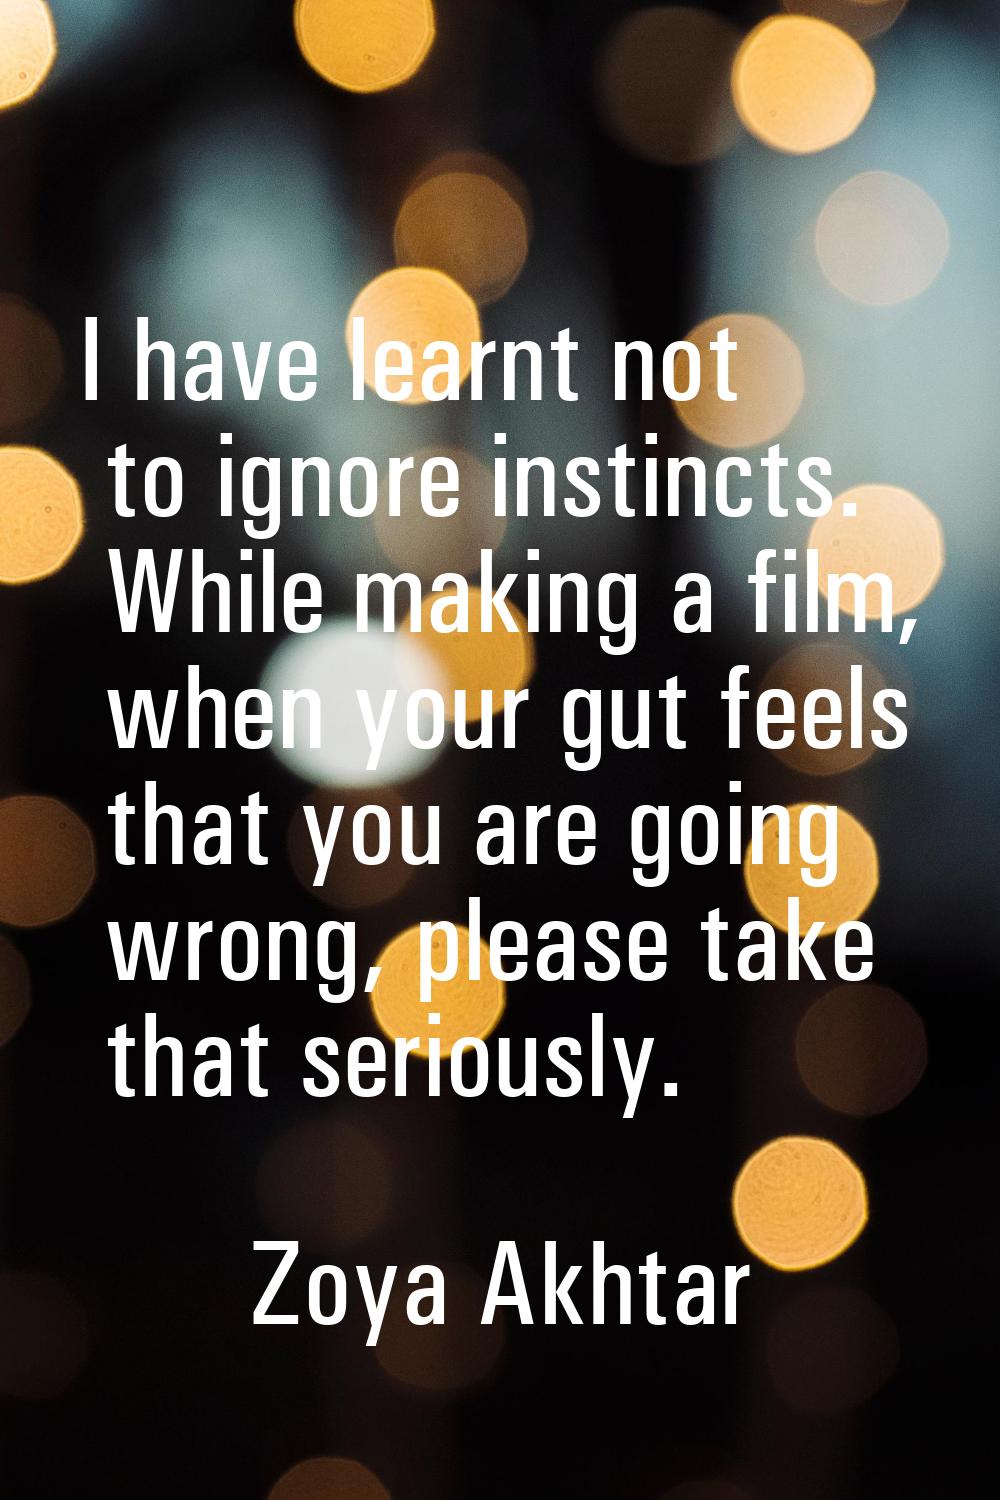 I have learnt not to ignore instincts. While making a film, when your gut feels that you are going 